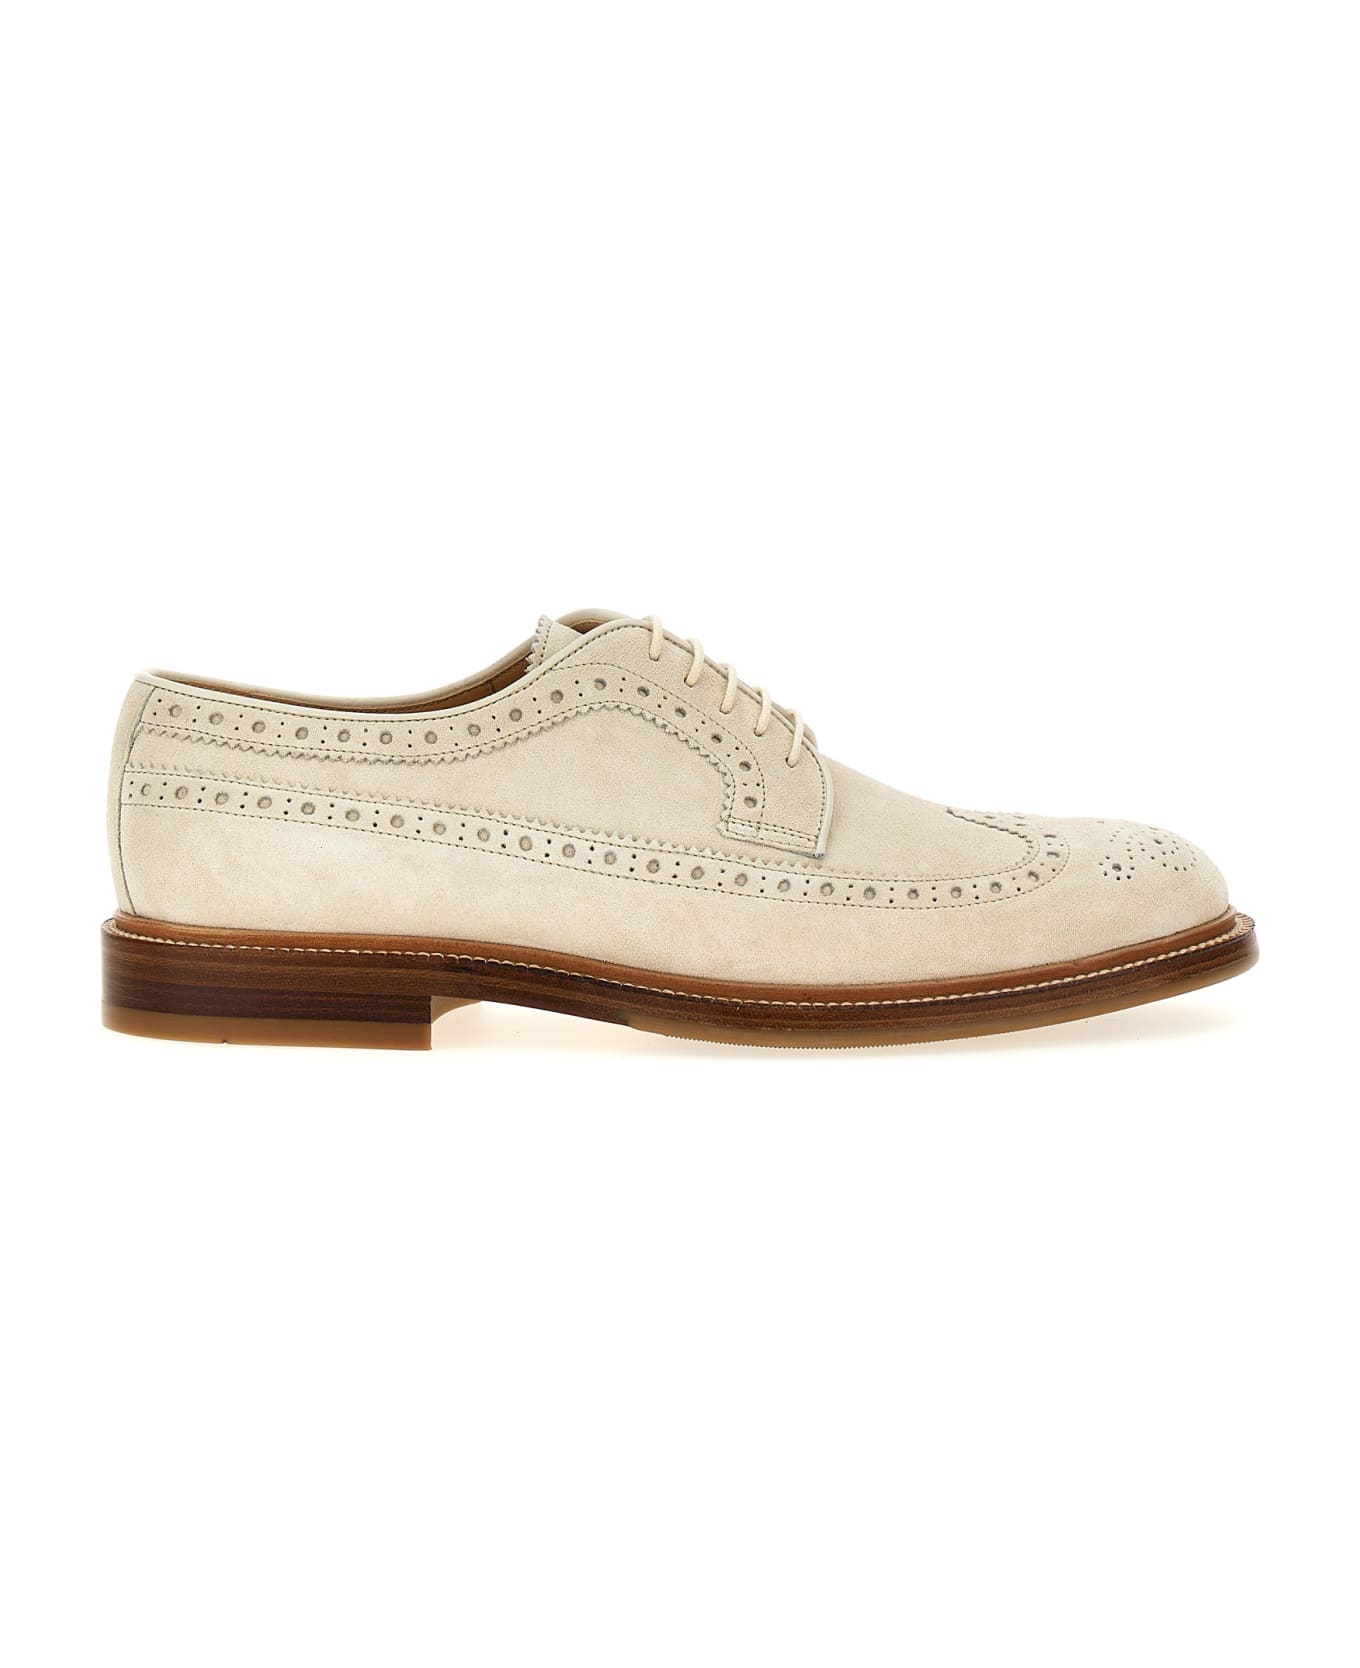 Brunello Cucinelli Dovetail Lace-up Shoes - White